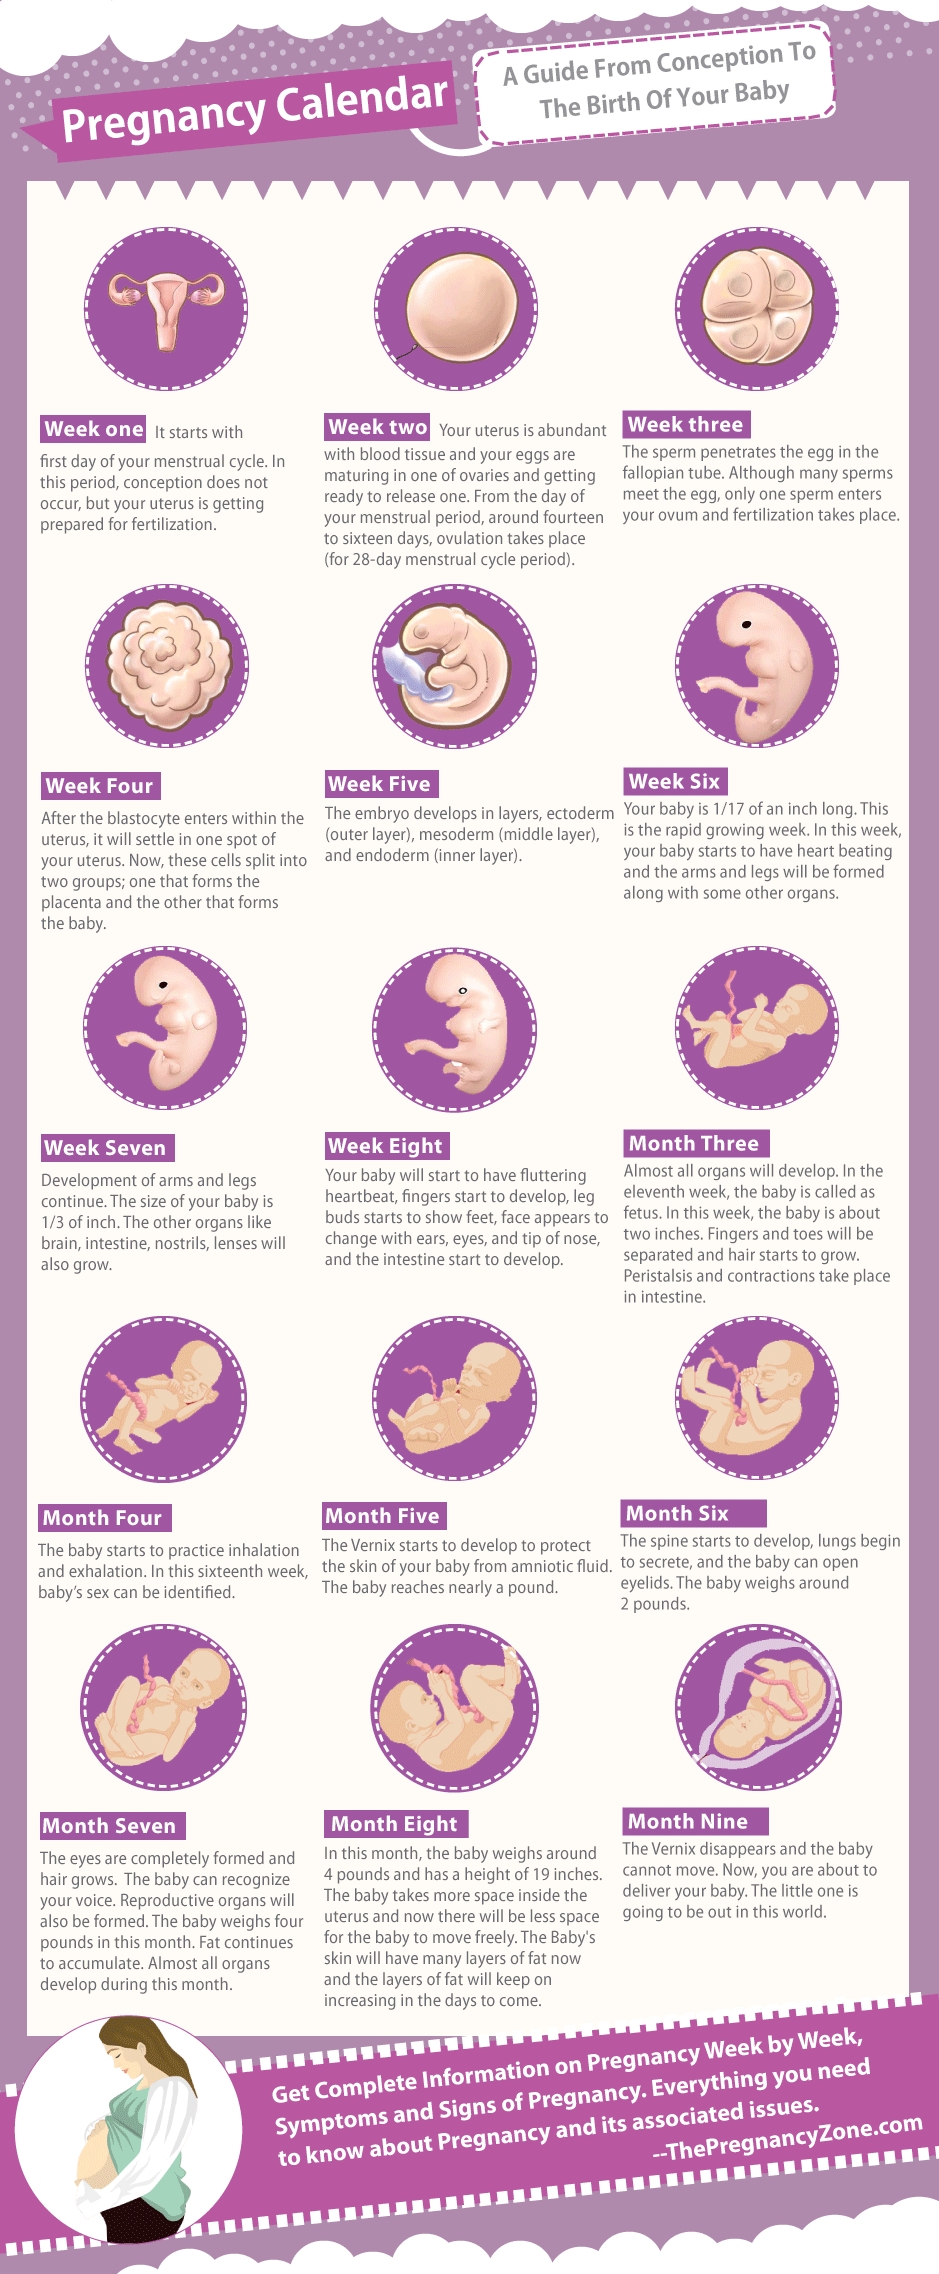 A Guide From Conception To The Birth Of Your Baby #pregnancy with regard to Month By Month Pregnancy Calendar